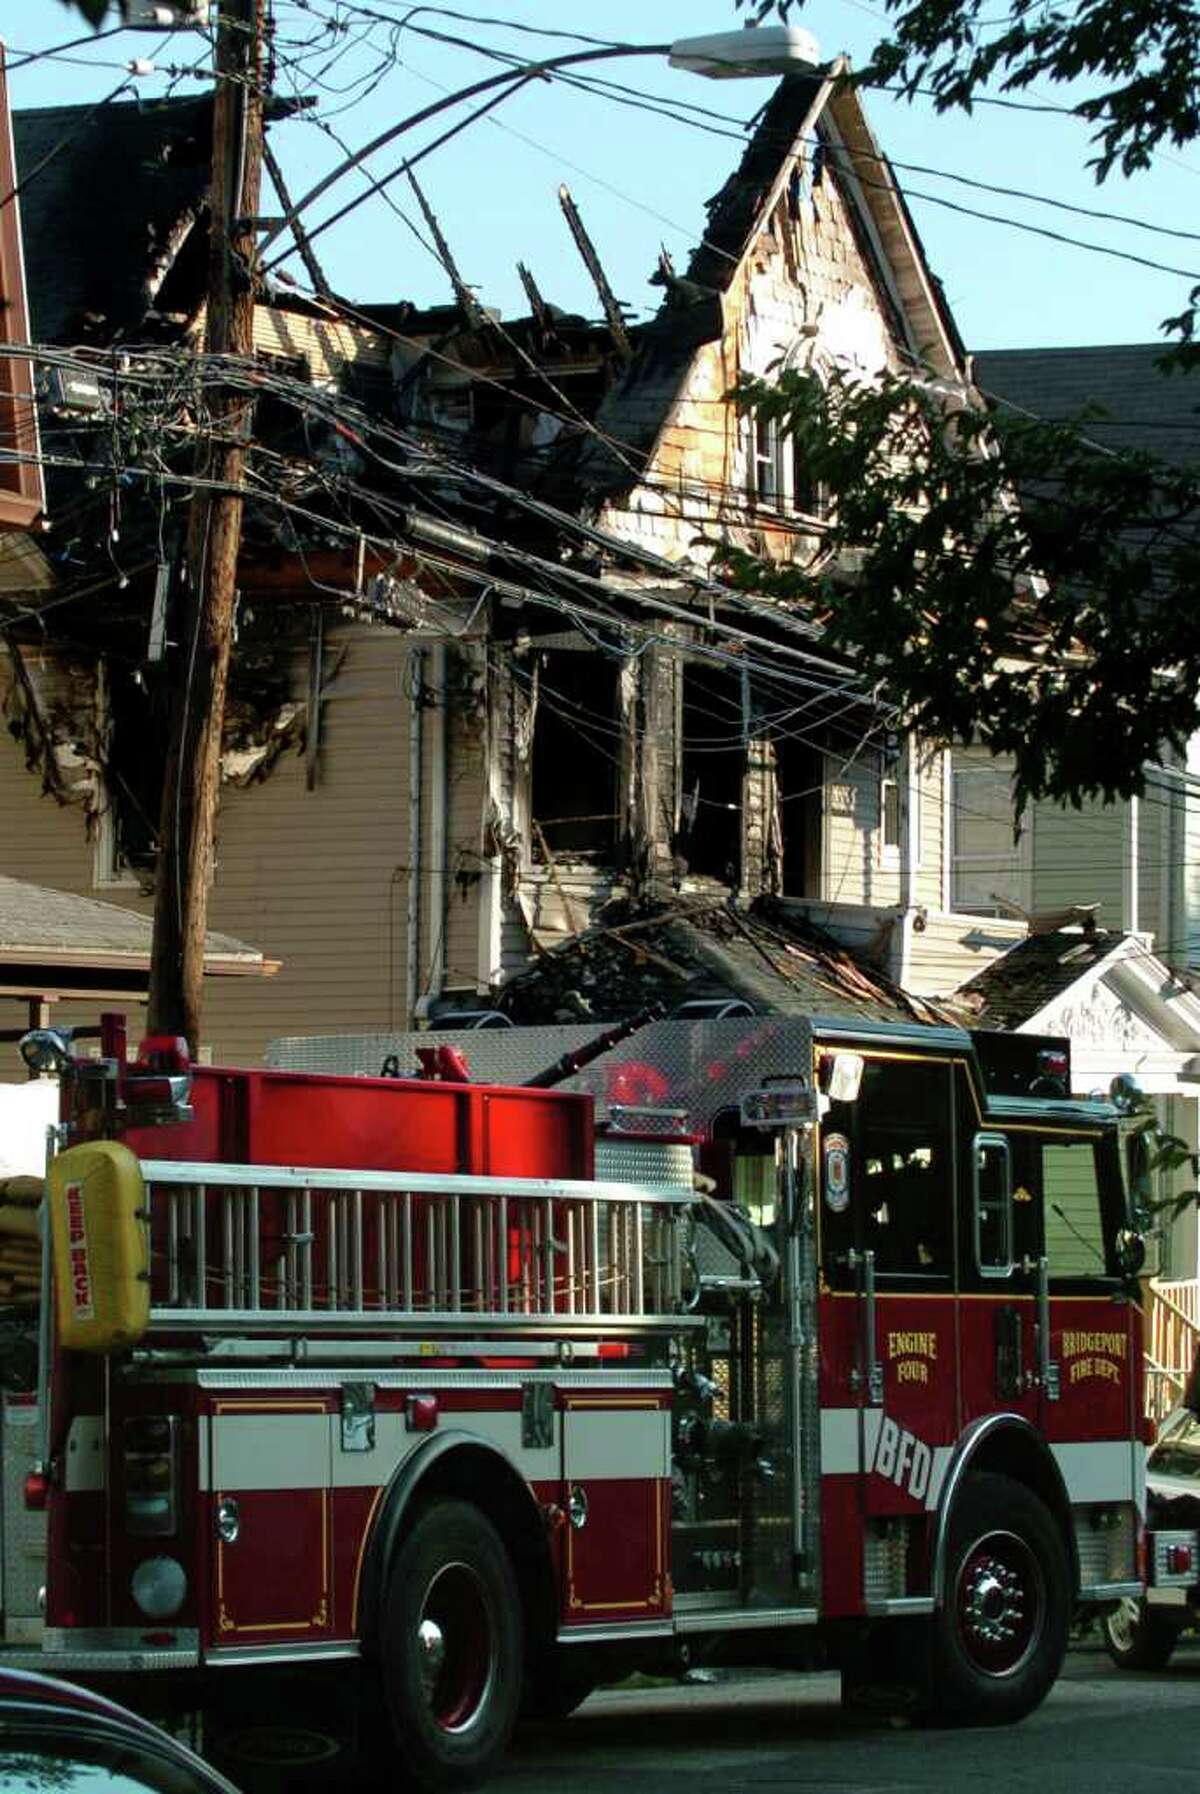 The scene at 41 Elmwood Ave. in Bridgeport, Conn. on July 24, 2010. Bridgeport Fire Department Lt. Steven Velasquez and firefighter Michel Baik were killed fighting a fire in the home that day.